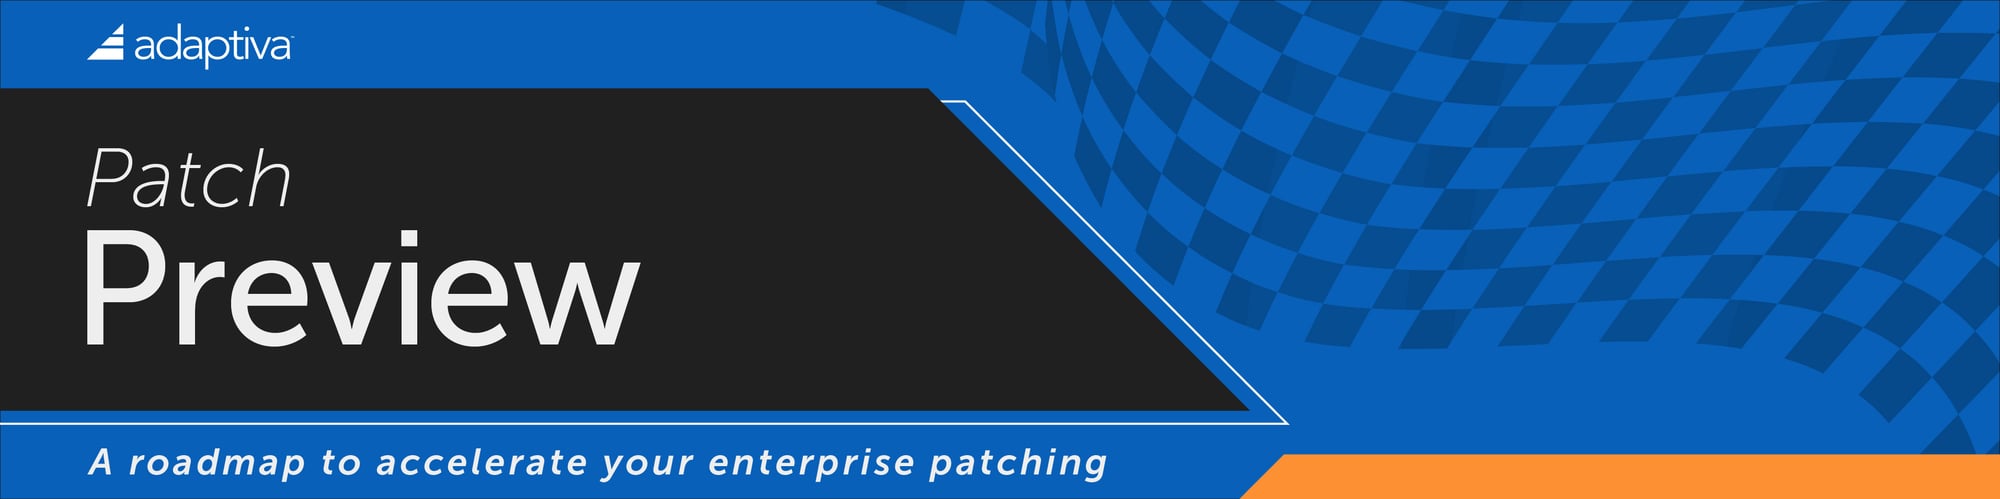 2401_Patching_Preview_TEAMS_Banner_m1